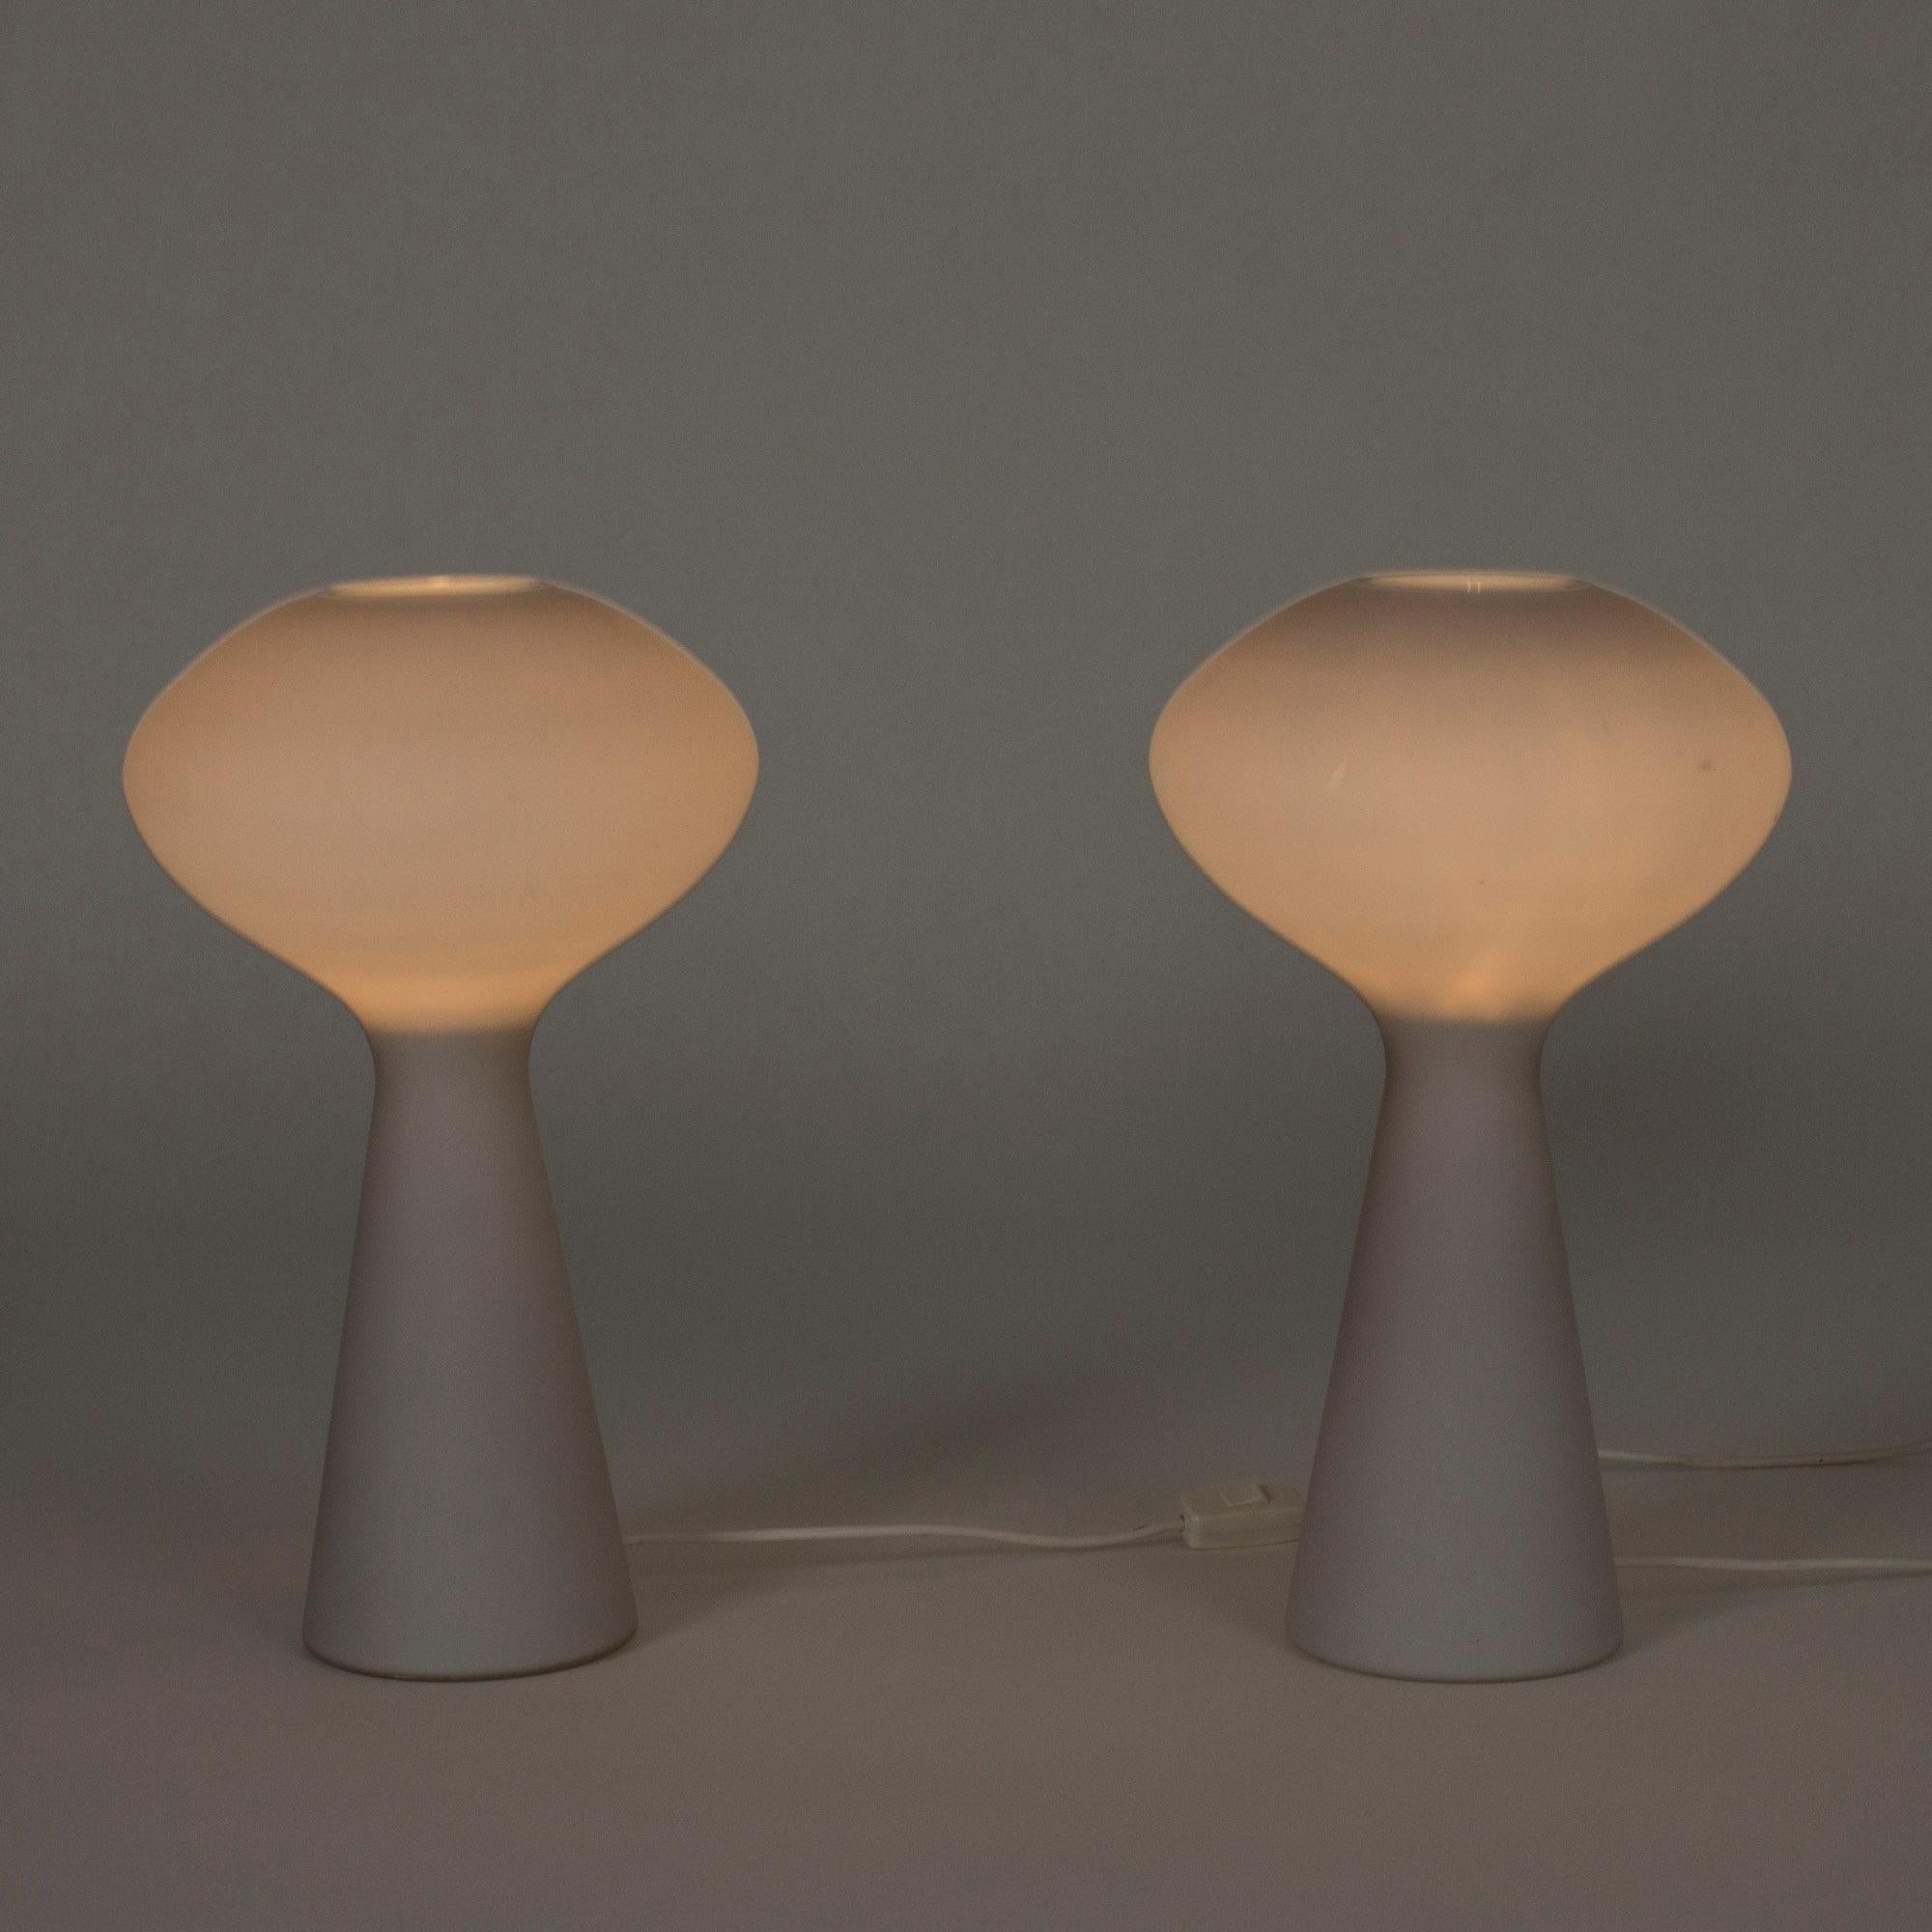 Pair of table lamps by Lisa Johansson-Pape. Made from Opaline glass in a design with underwater and space references. Look amazing, especially when lit.